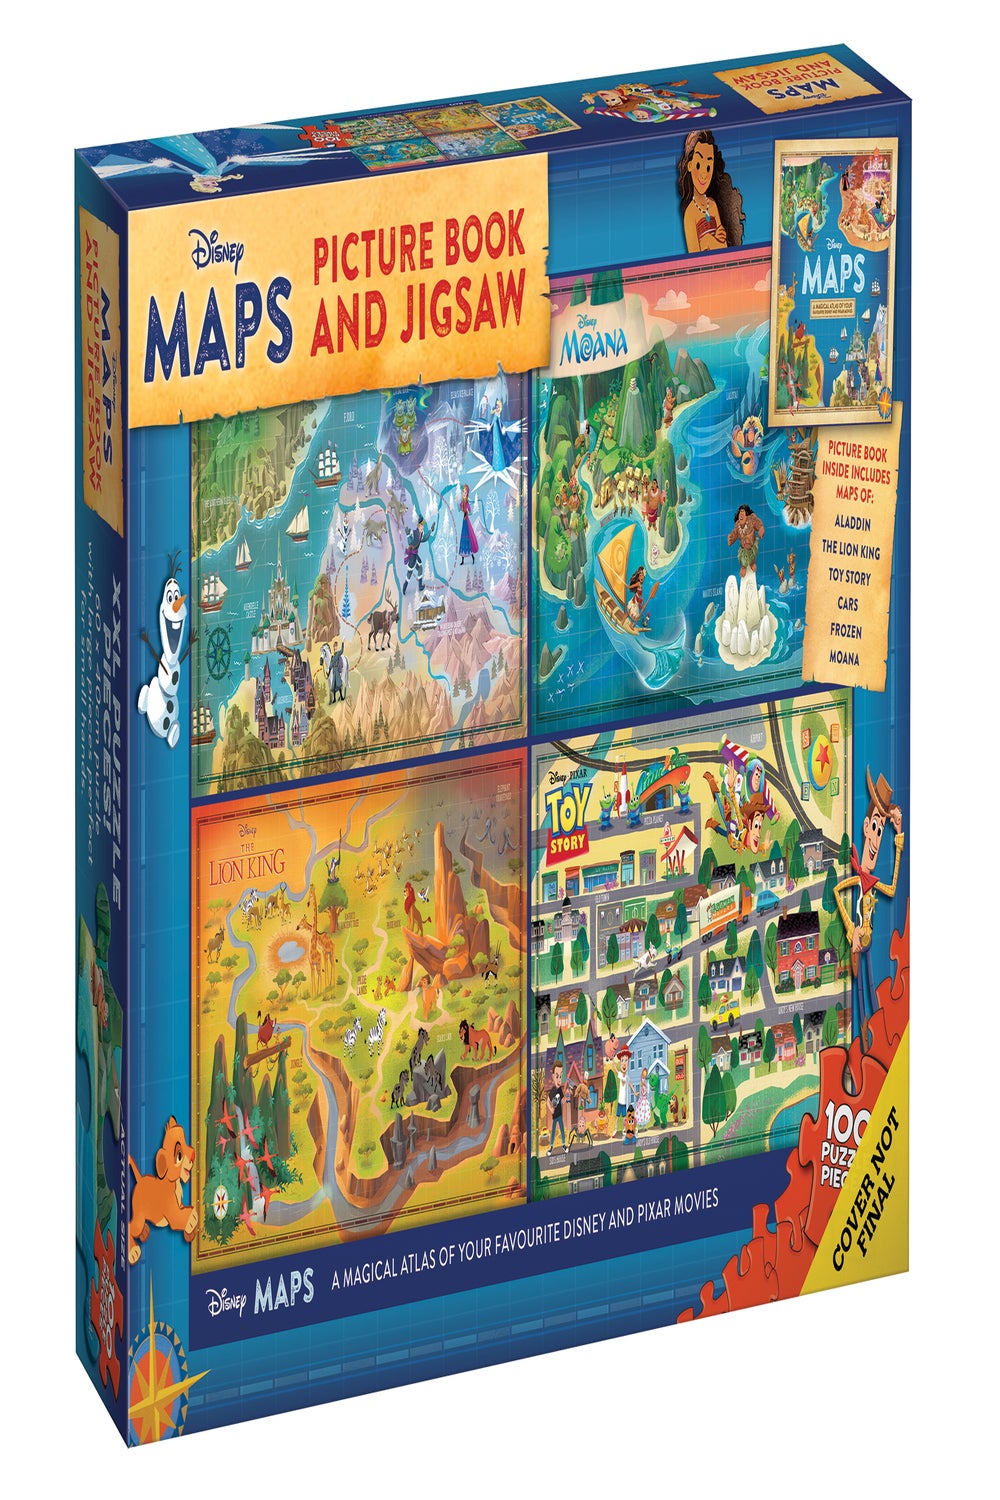 Disney Maps Picture Book and Jigsaw by Paper Plus